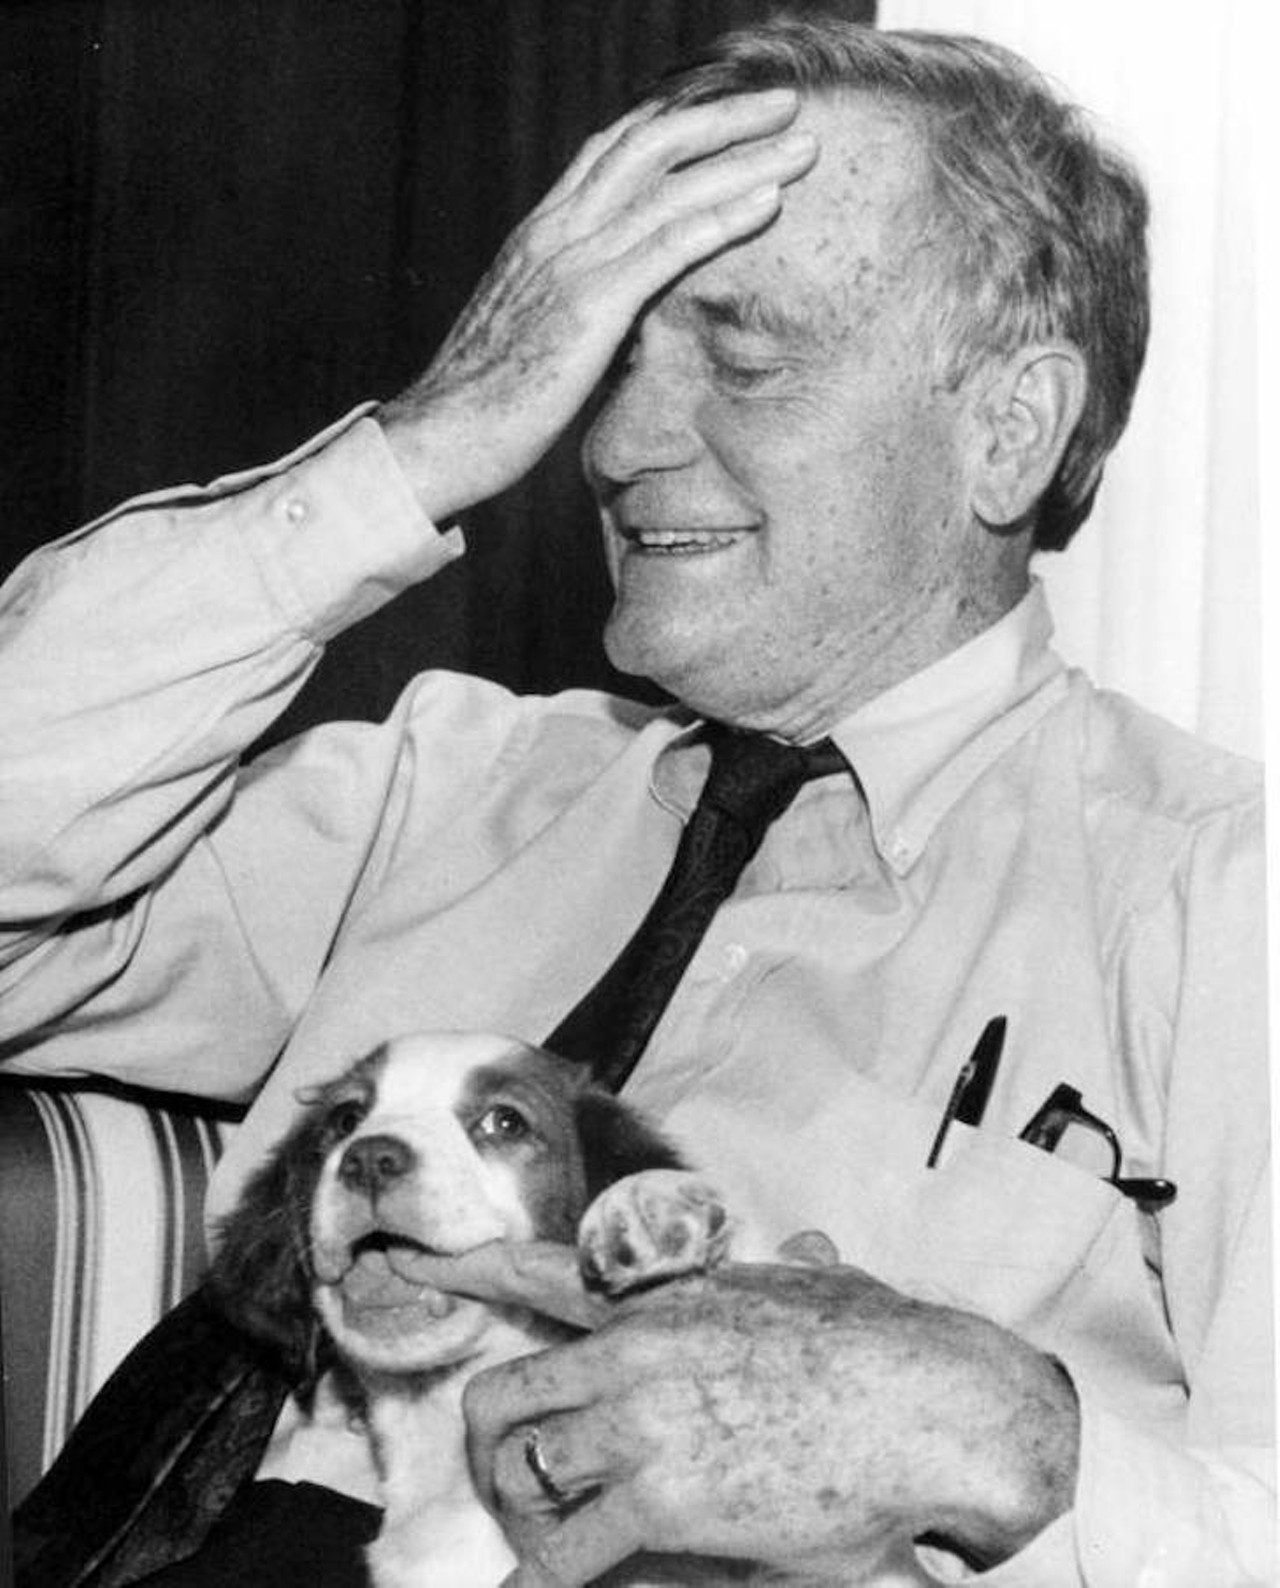 Governor Chiles and his dog in Tallahassee, Florida, photographed in 1998.